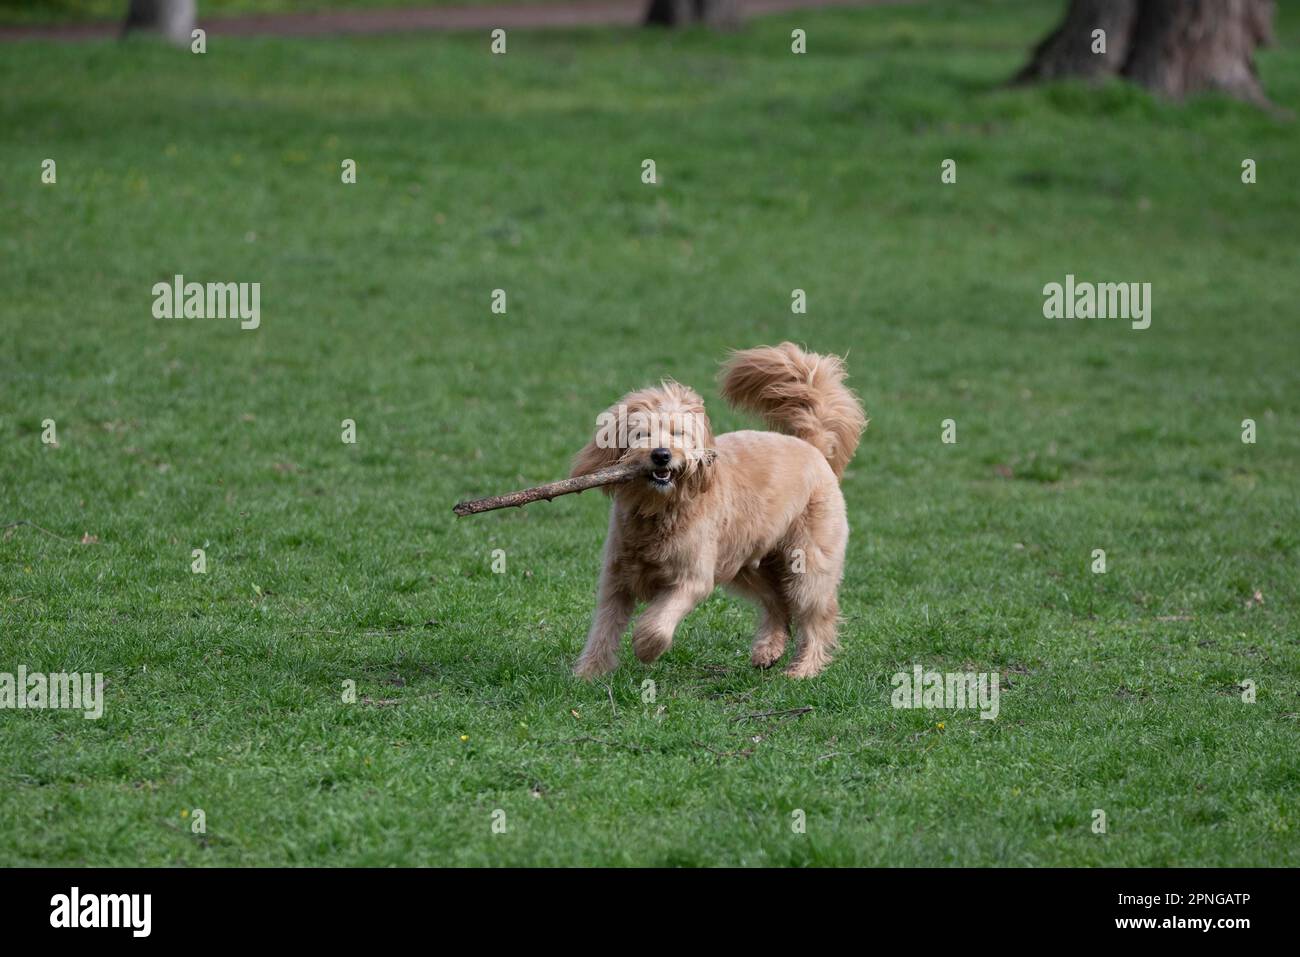 Mini Goldendoodle bites into stick, cross between Golden Retriever and Poodle, dog breed hardly sheds, therefore suitable for allergy sufferers Stock Photo